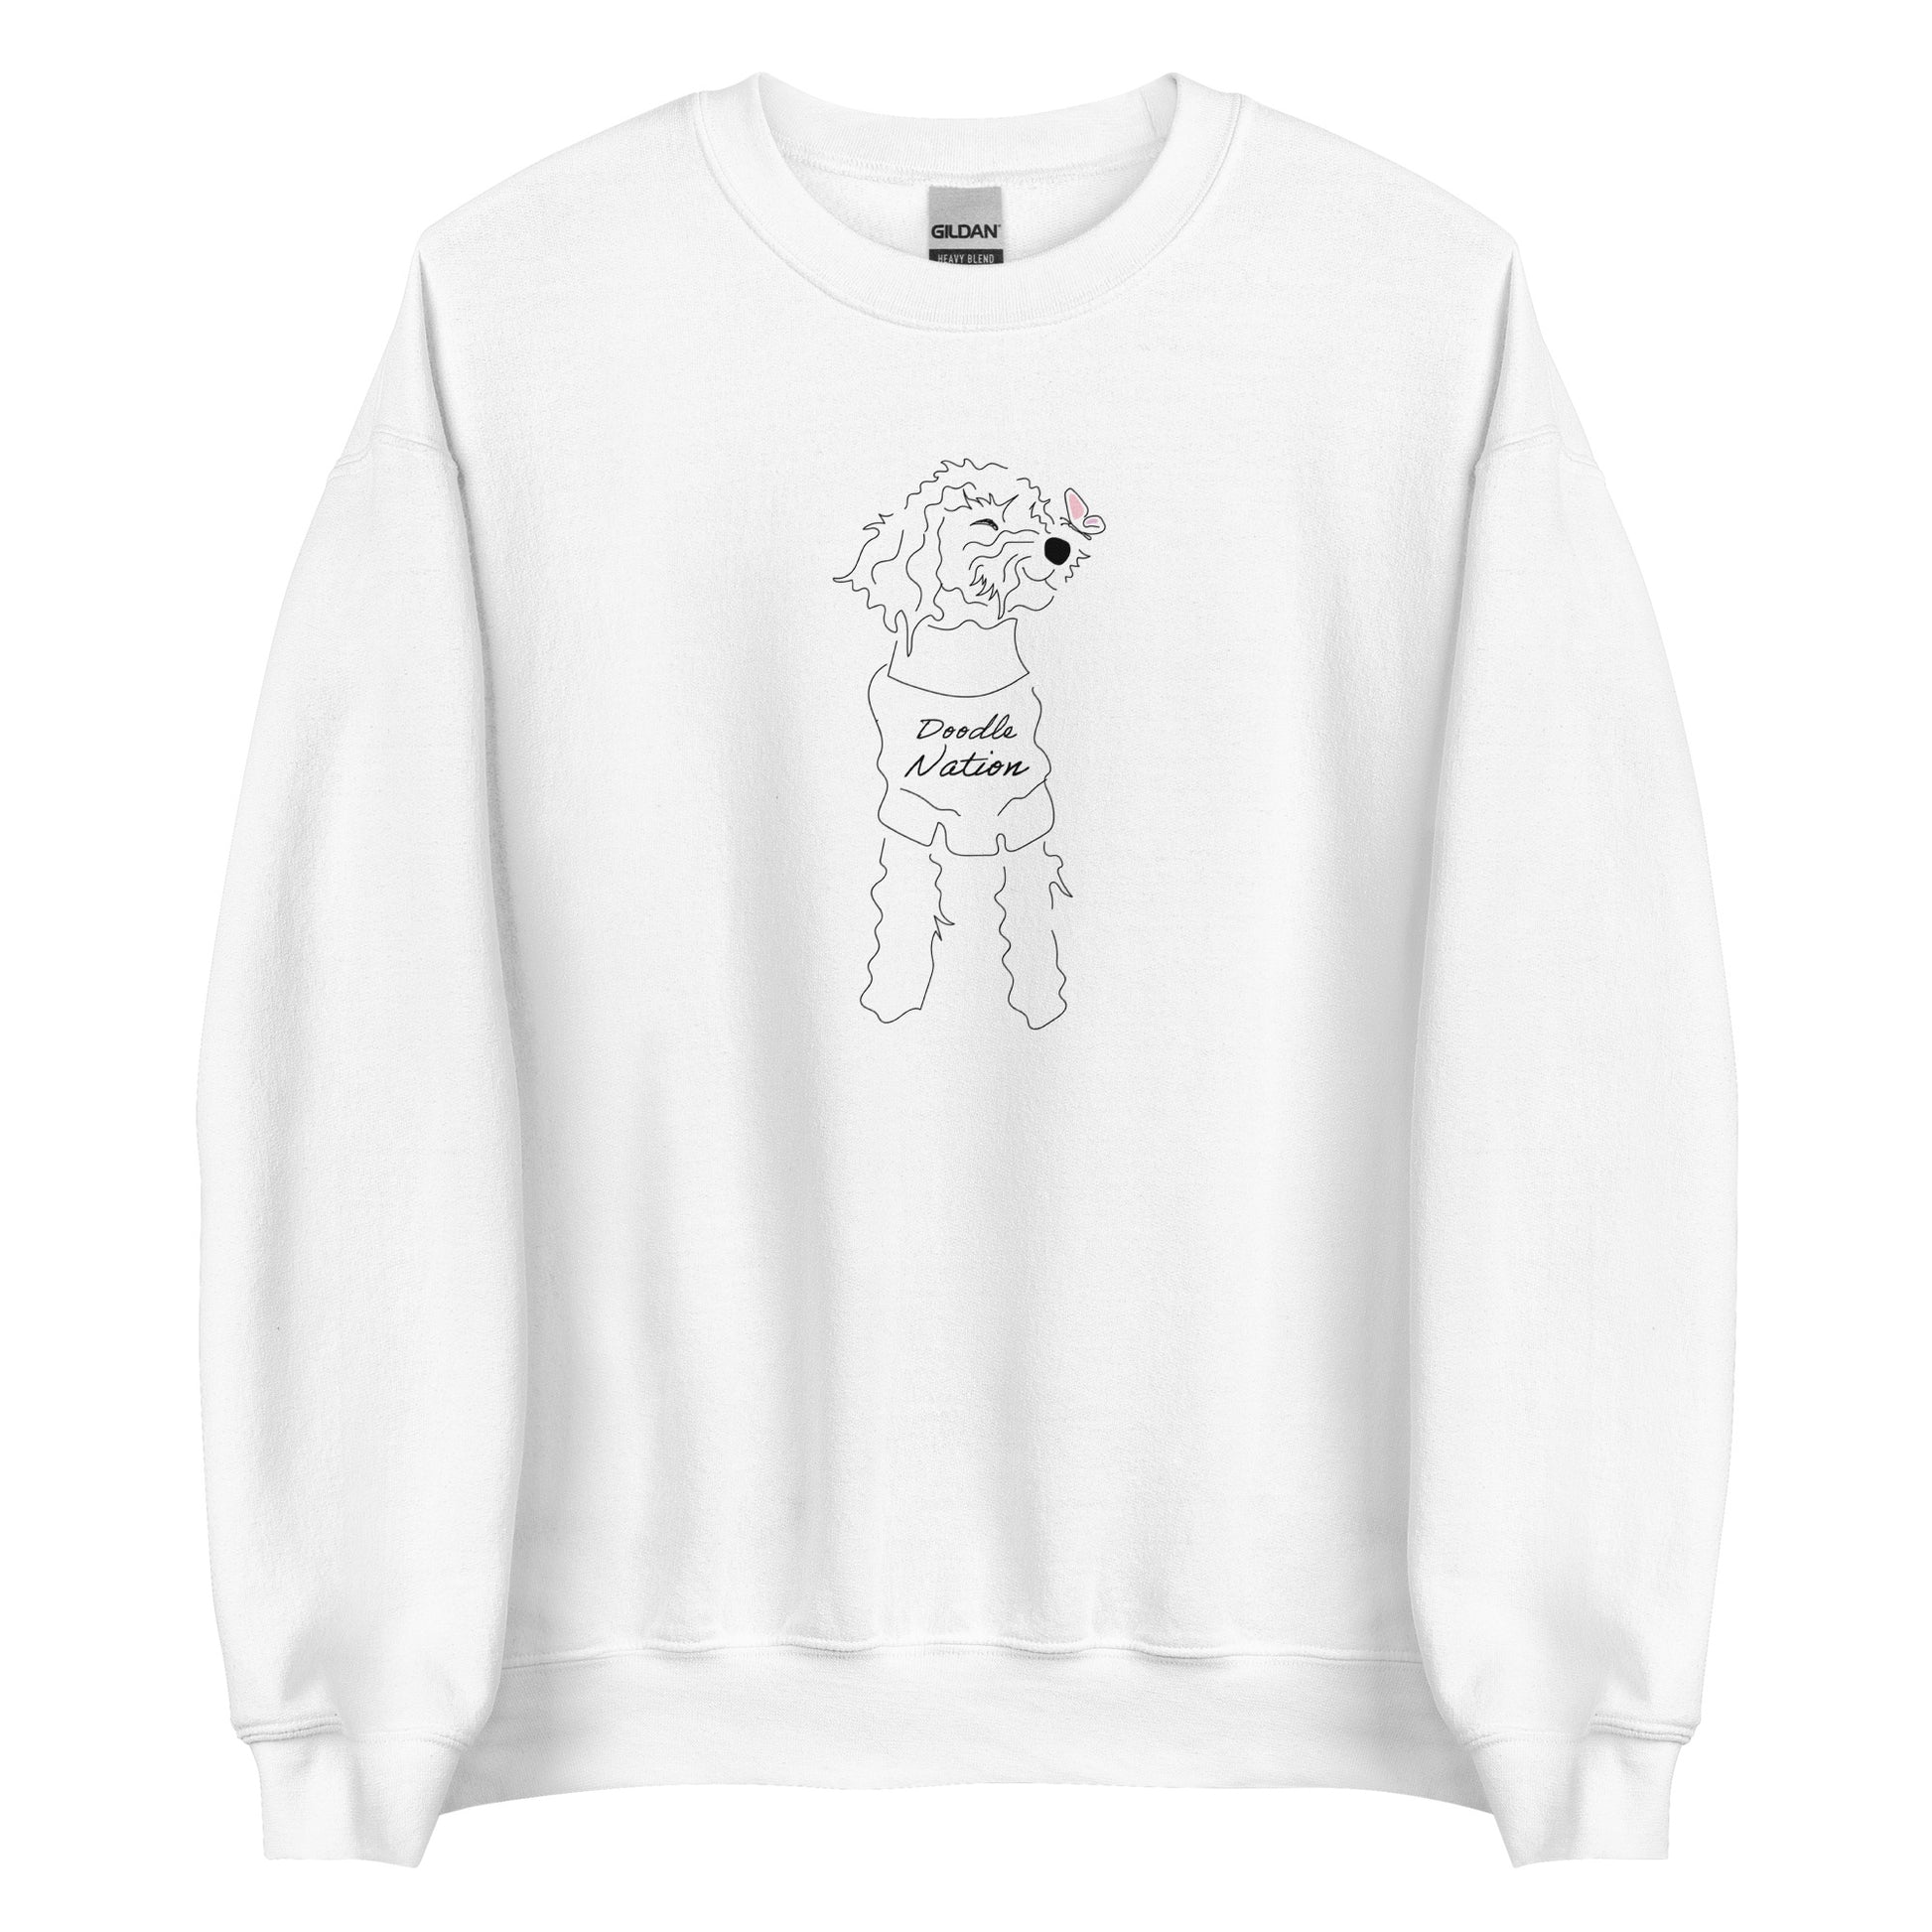 Goldendoodle crew neck sweatshirt with Goldendoodle dog face and words "Doodle Nation" in white color